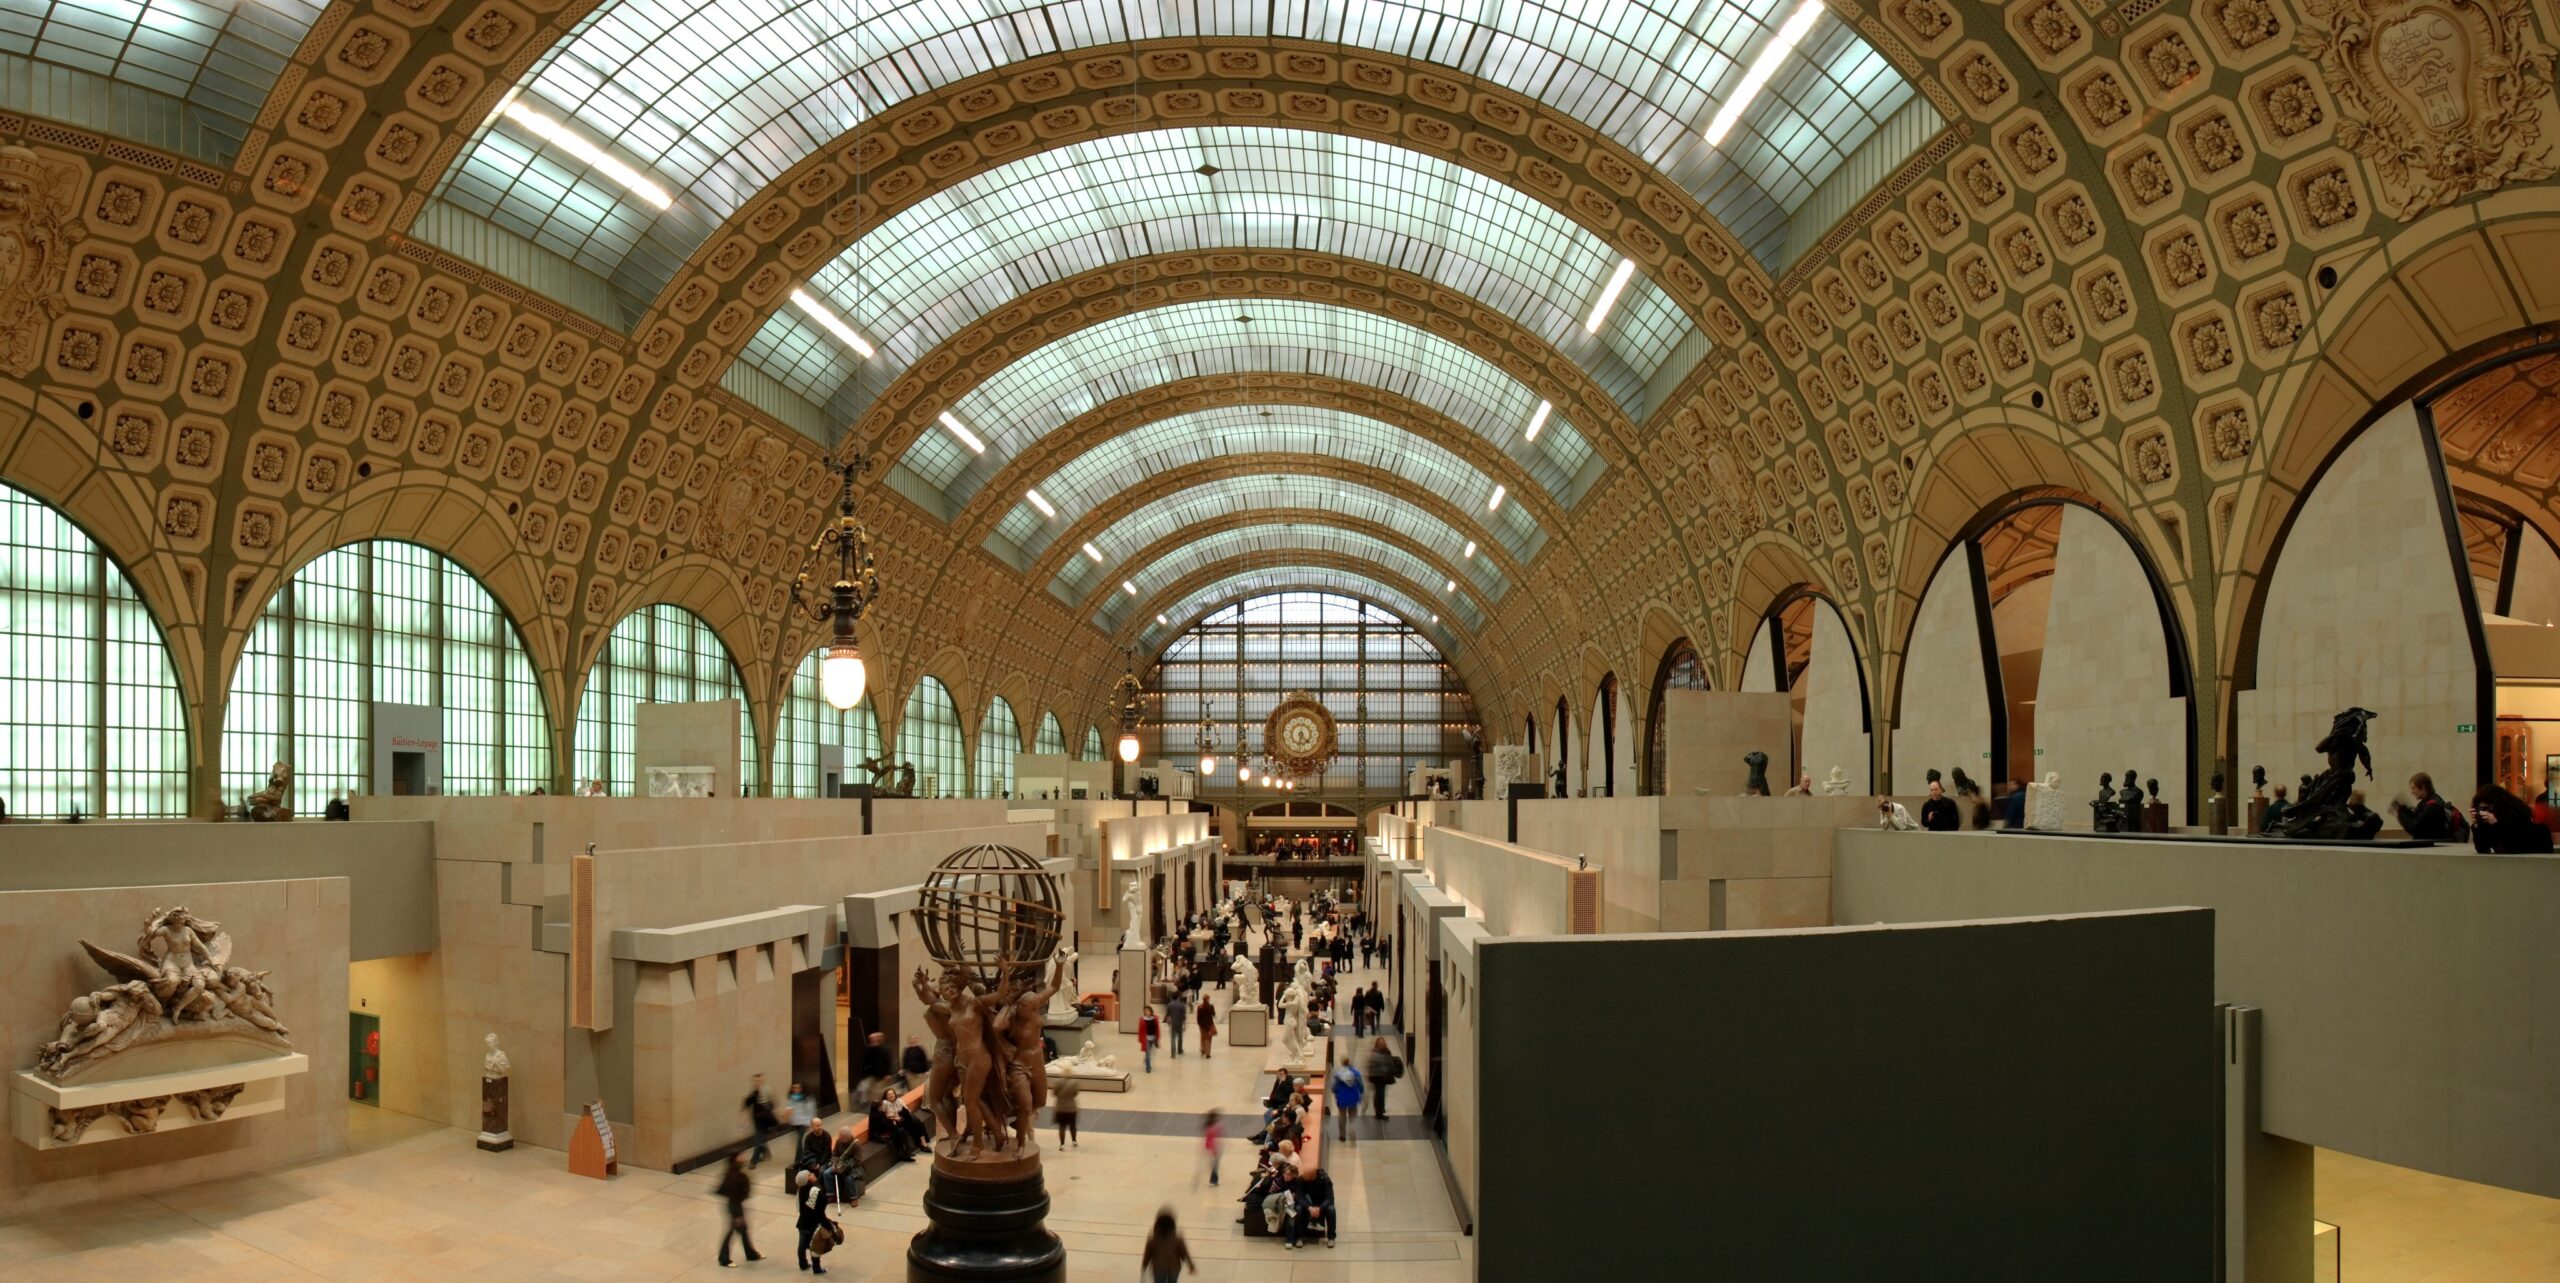 Panoramic image of the inside of a museum. There is a large arched ceiling ceiling and there is a stream of people of looking at exhibits scattered throughout.